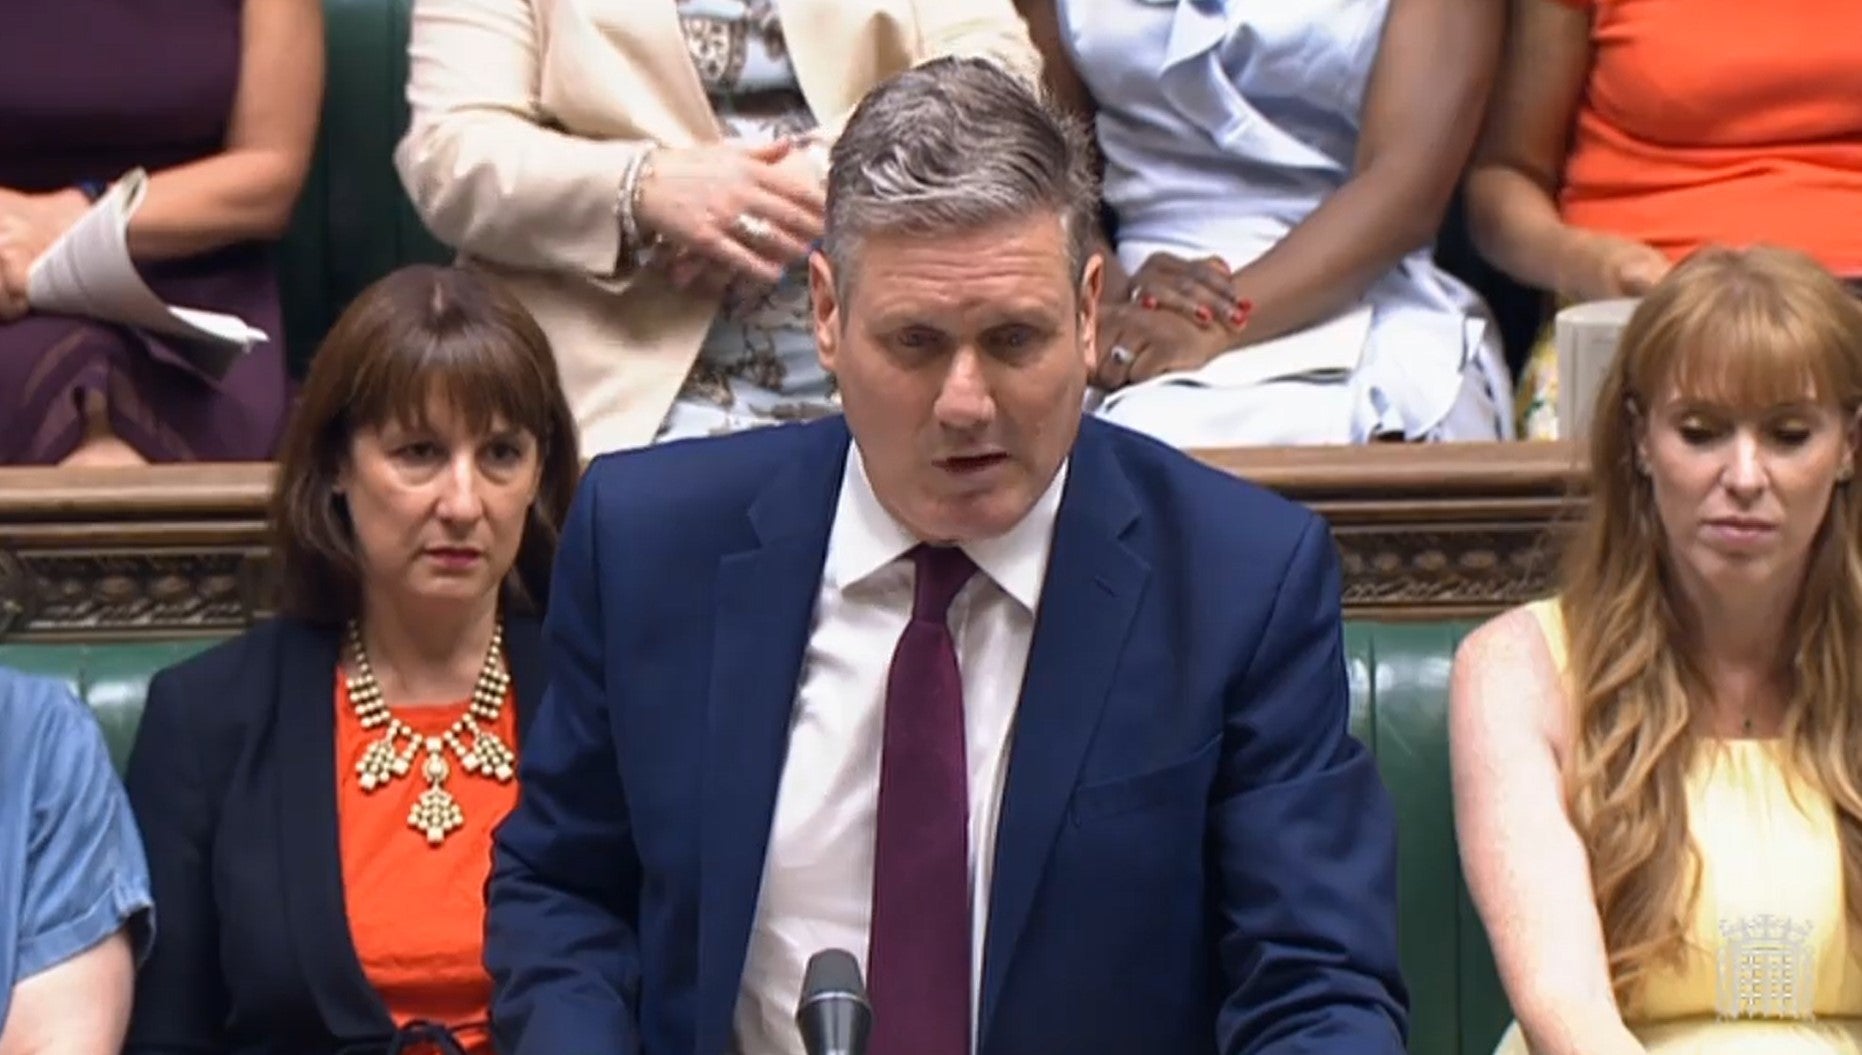 Keir Starmer challenged Ms Truss over her plans at her first PMQs as leader